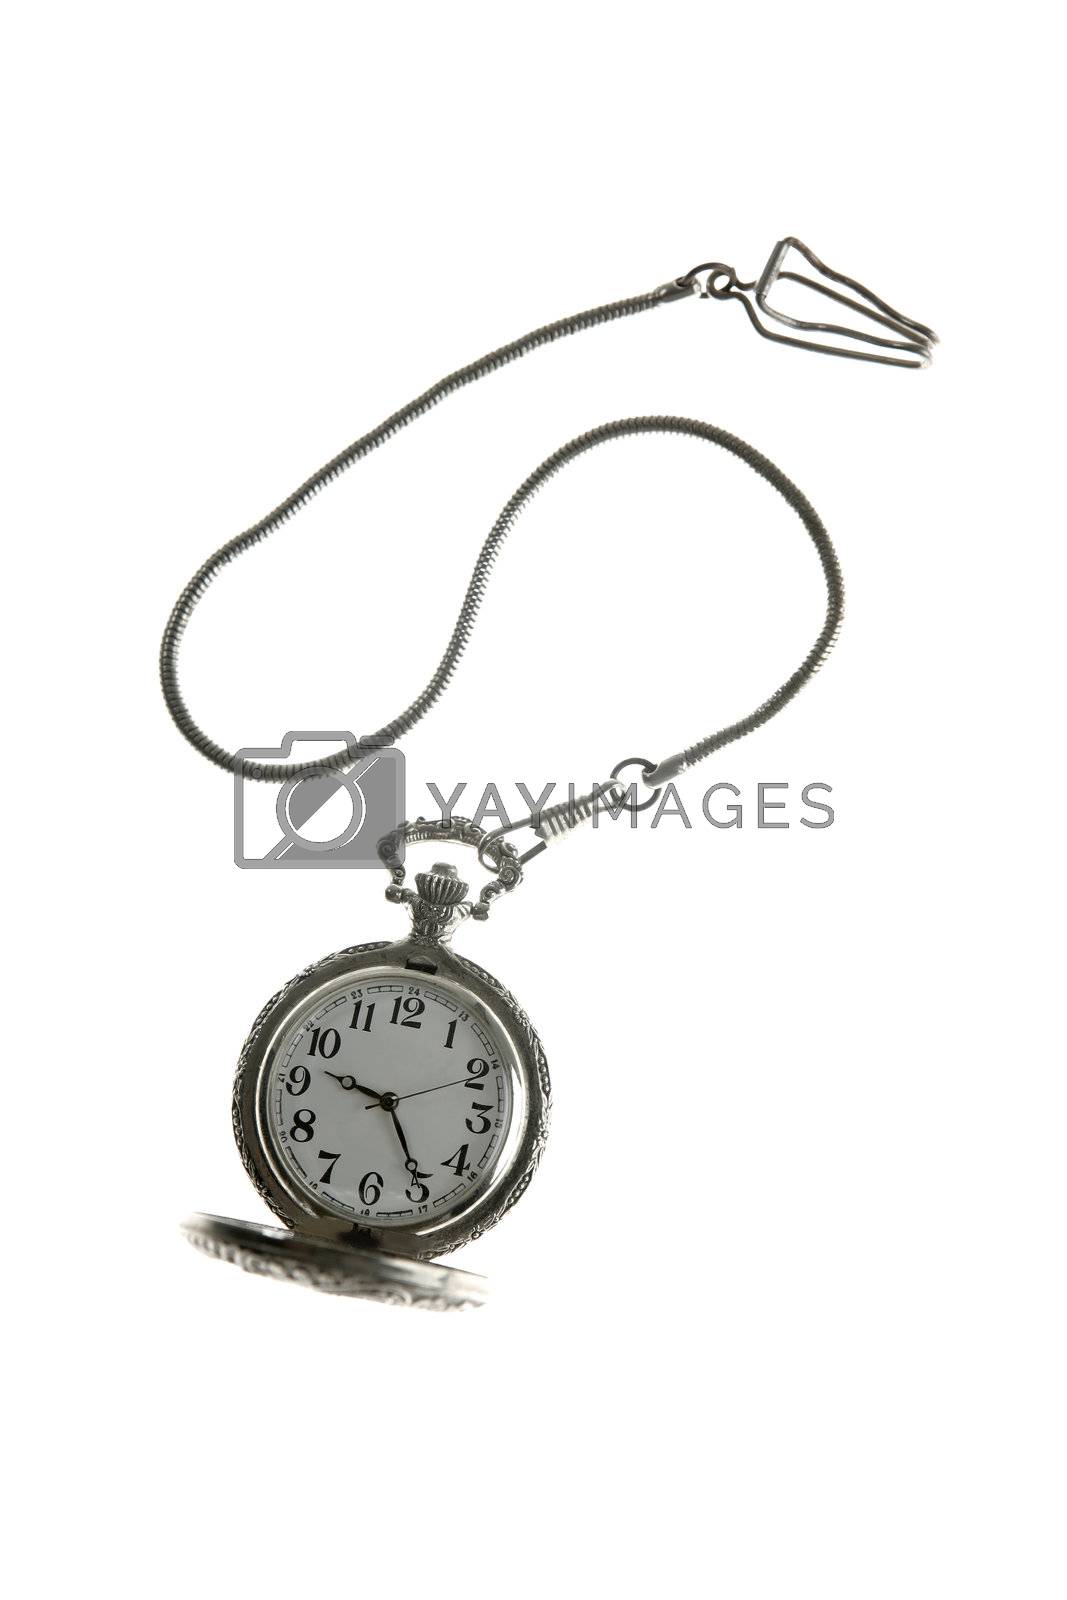 Royalty free image of old silver pocket watch clock with chain by lunamarina